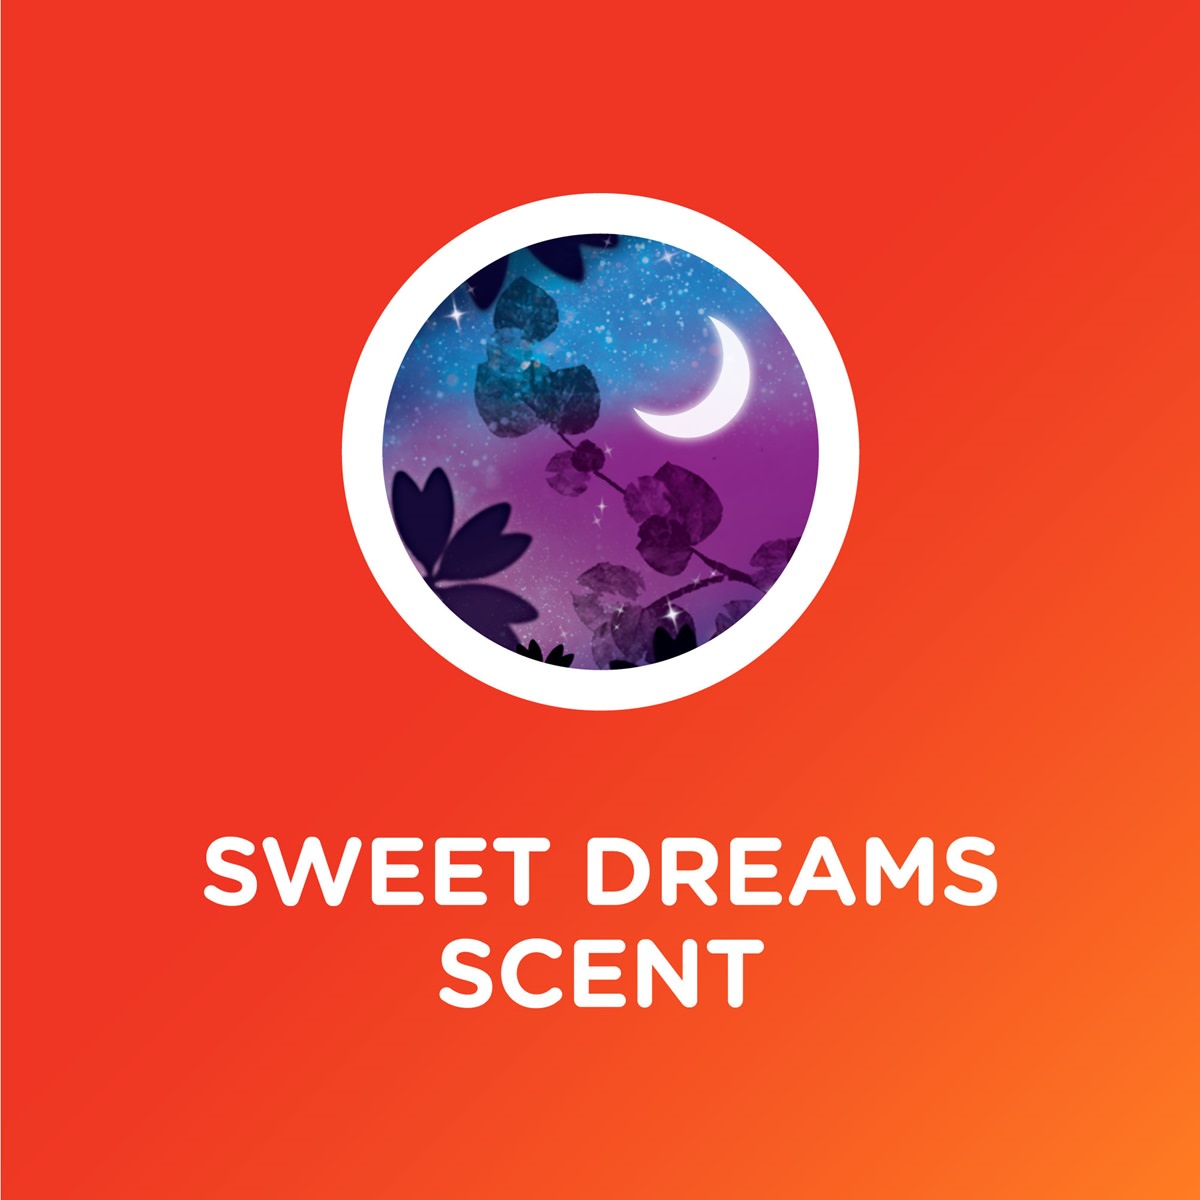 Bounce® Sweet Dreams Fabric Softener Dryer Sheets